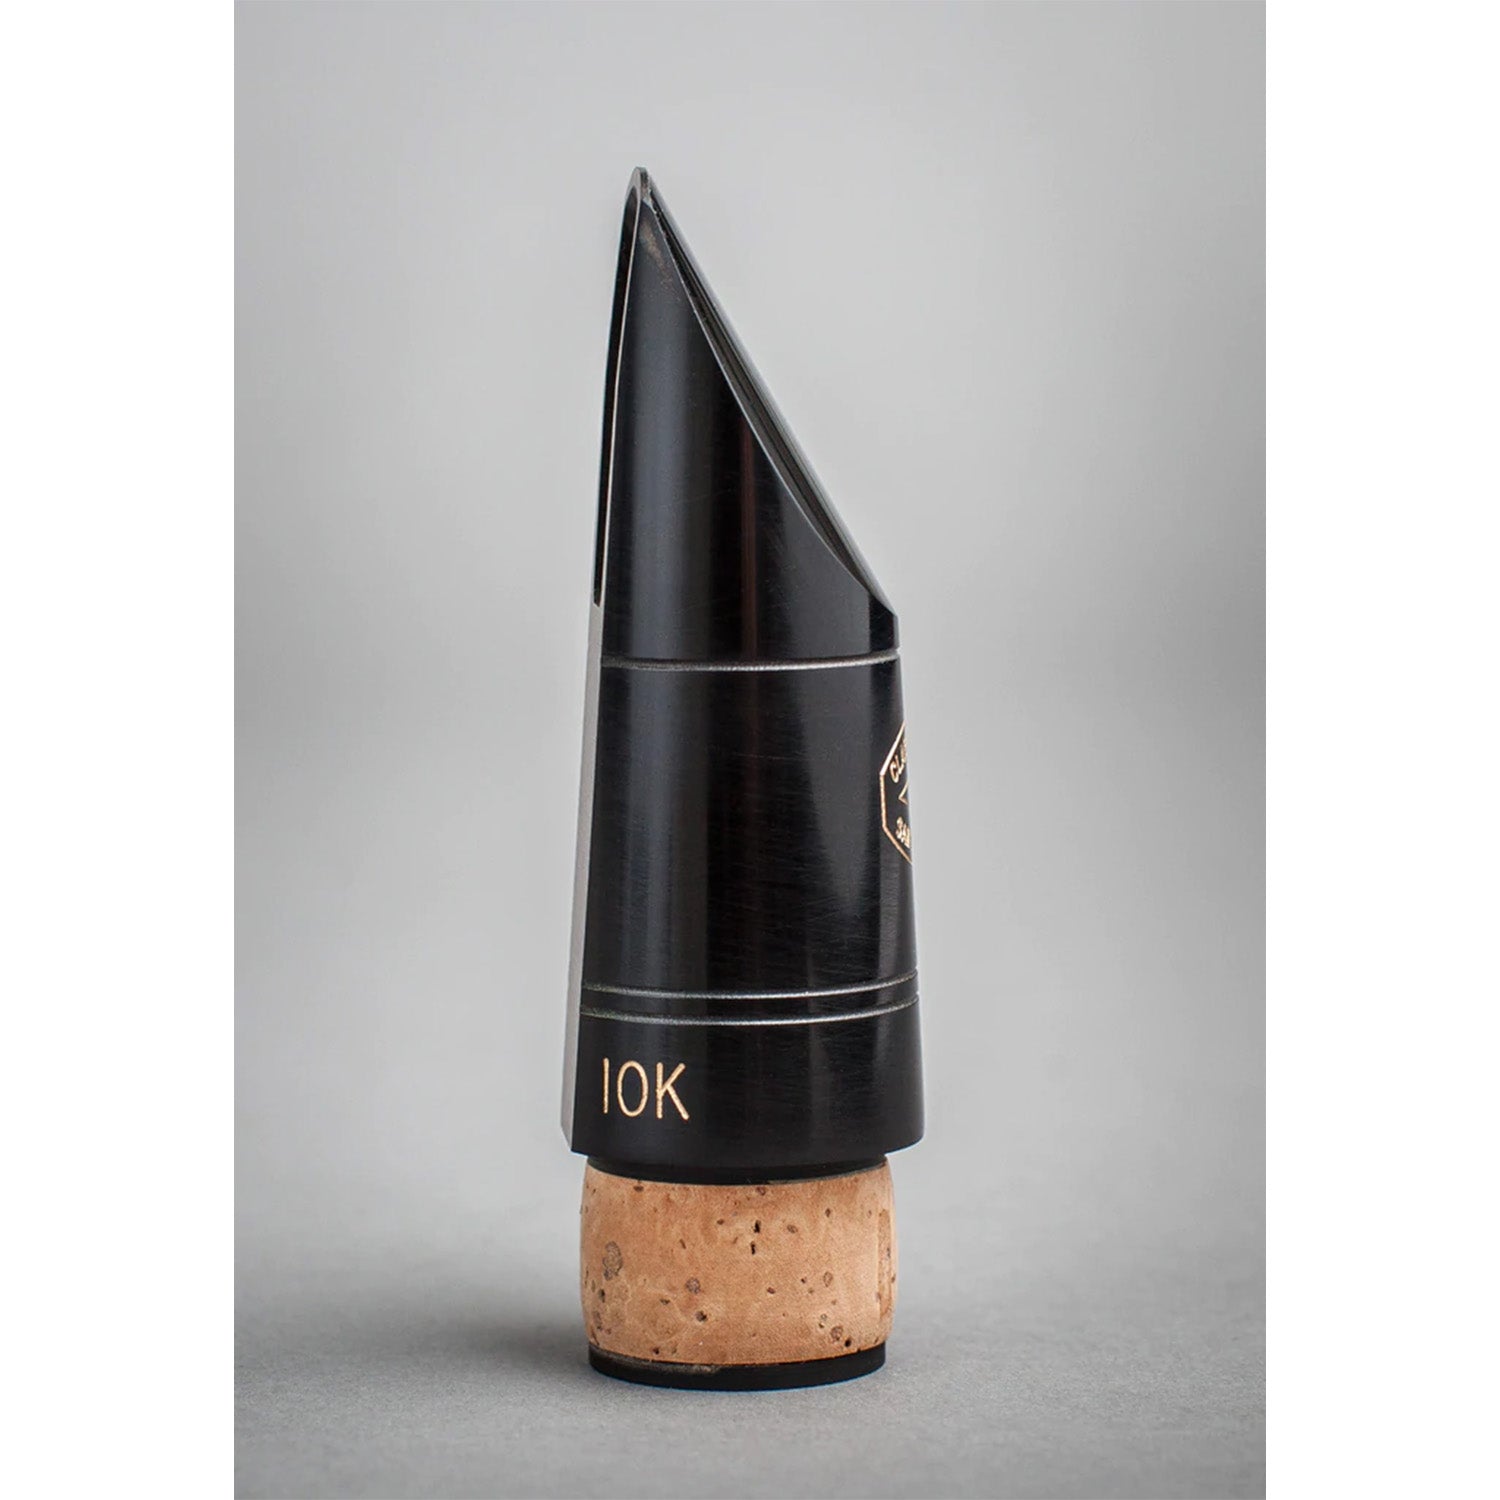 Side view of black Fobes 10k Bb mouthpiece on a gray background